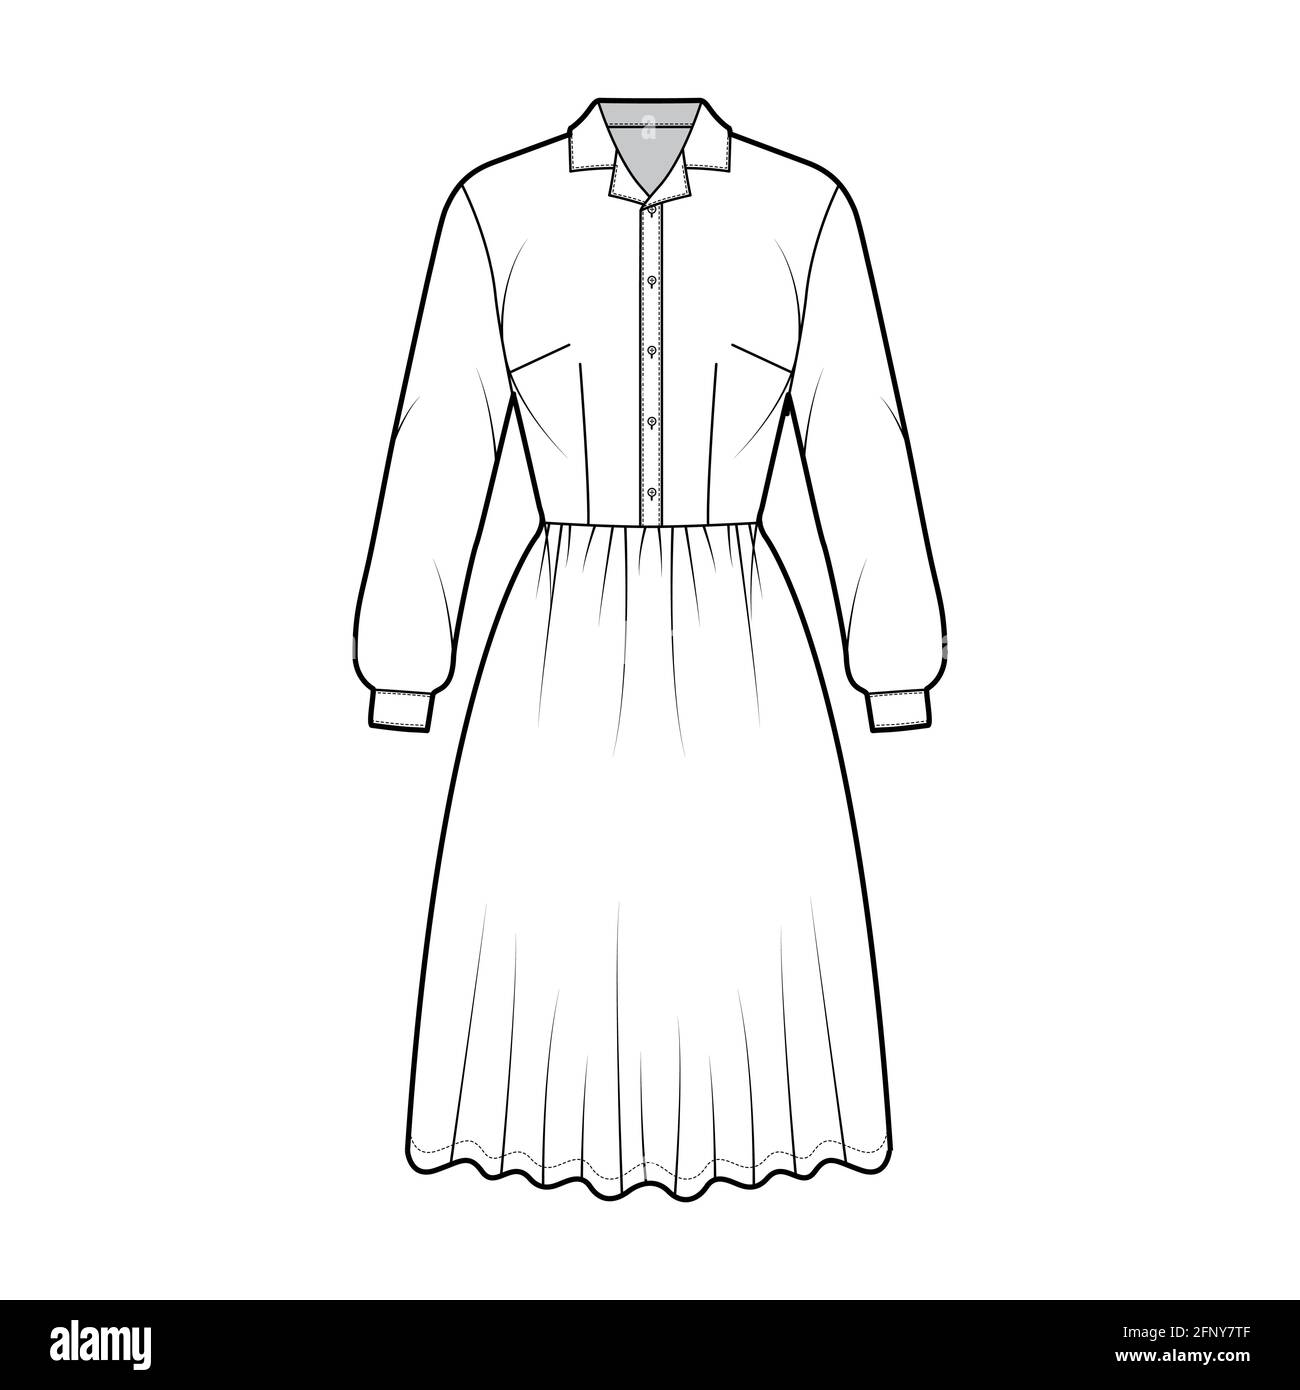 Dress house shirt technical fashion illustration with long sleeves with cuff, knee length full skirt, classic henley collar. Flat apparel front, white color style. Women, men unisex CAD mockup Stock Vector